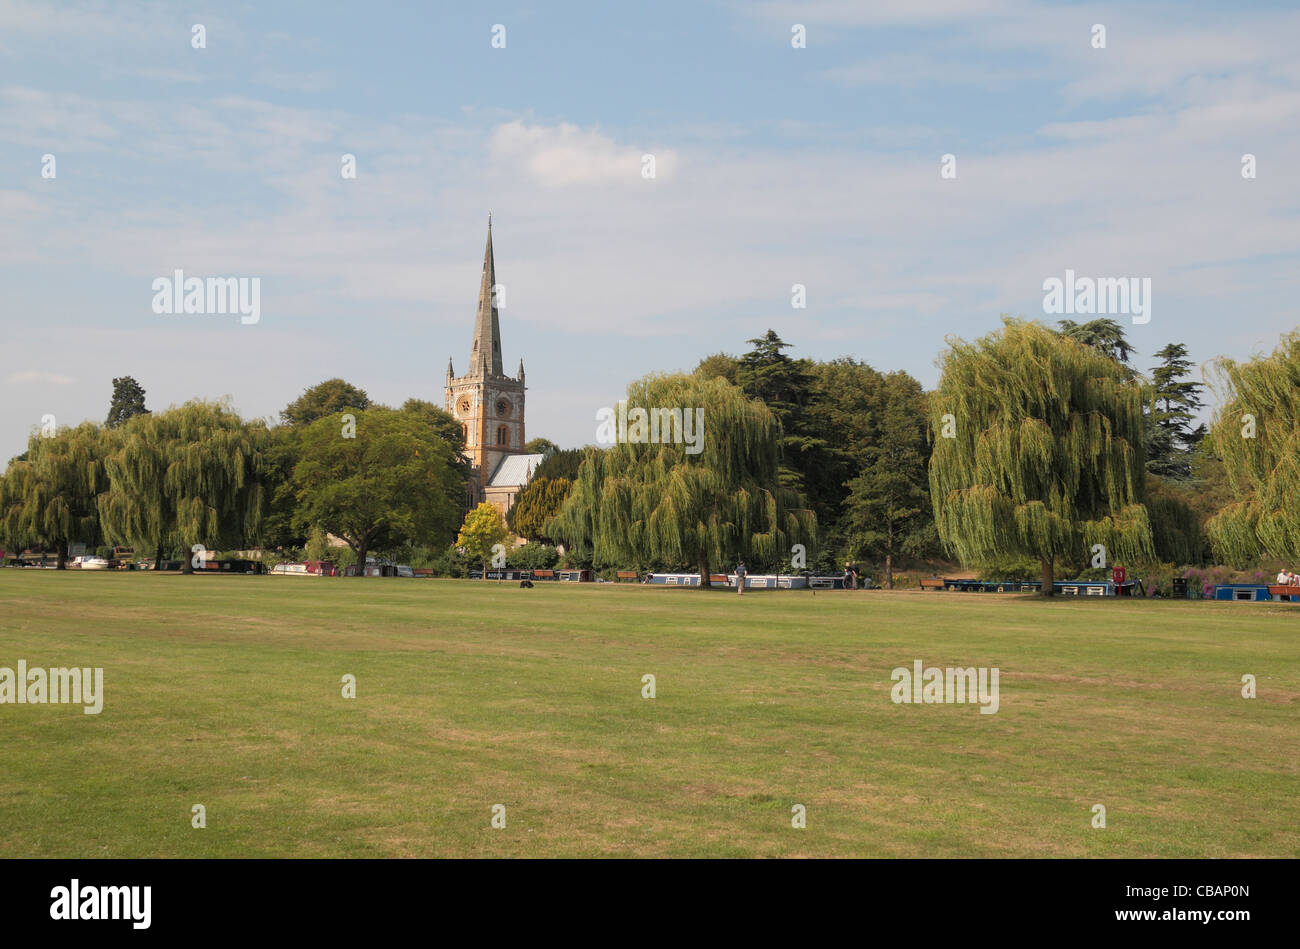 Holy Trinity Church, on the banks of the River Avon in Stratford Upon Avon, Warwickshire, UK. Stock Photo